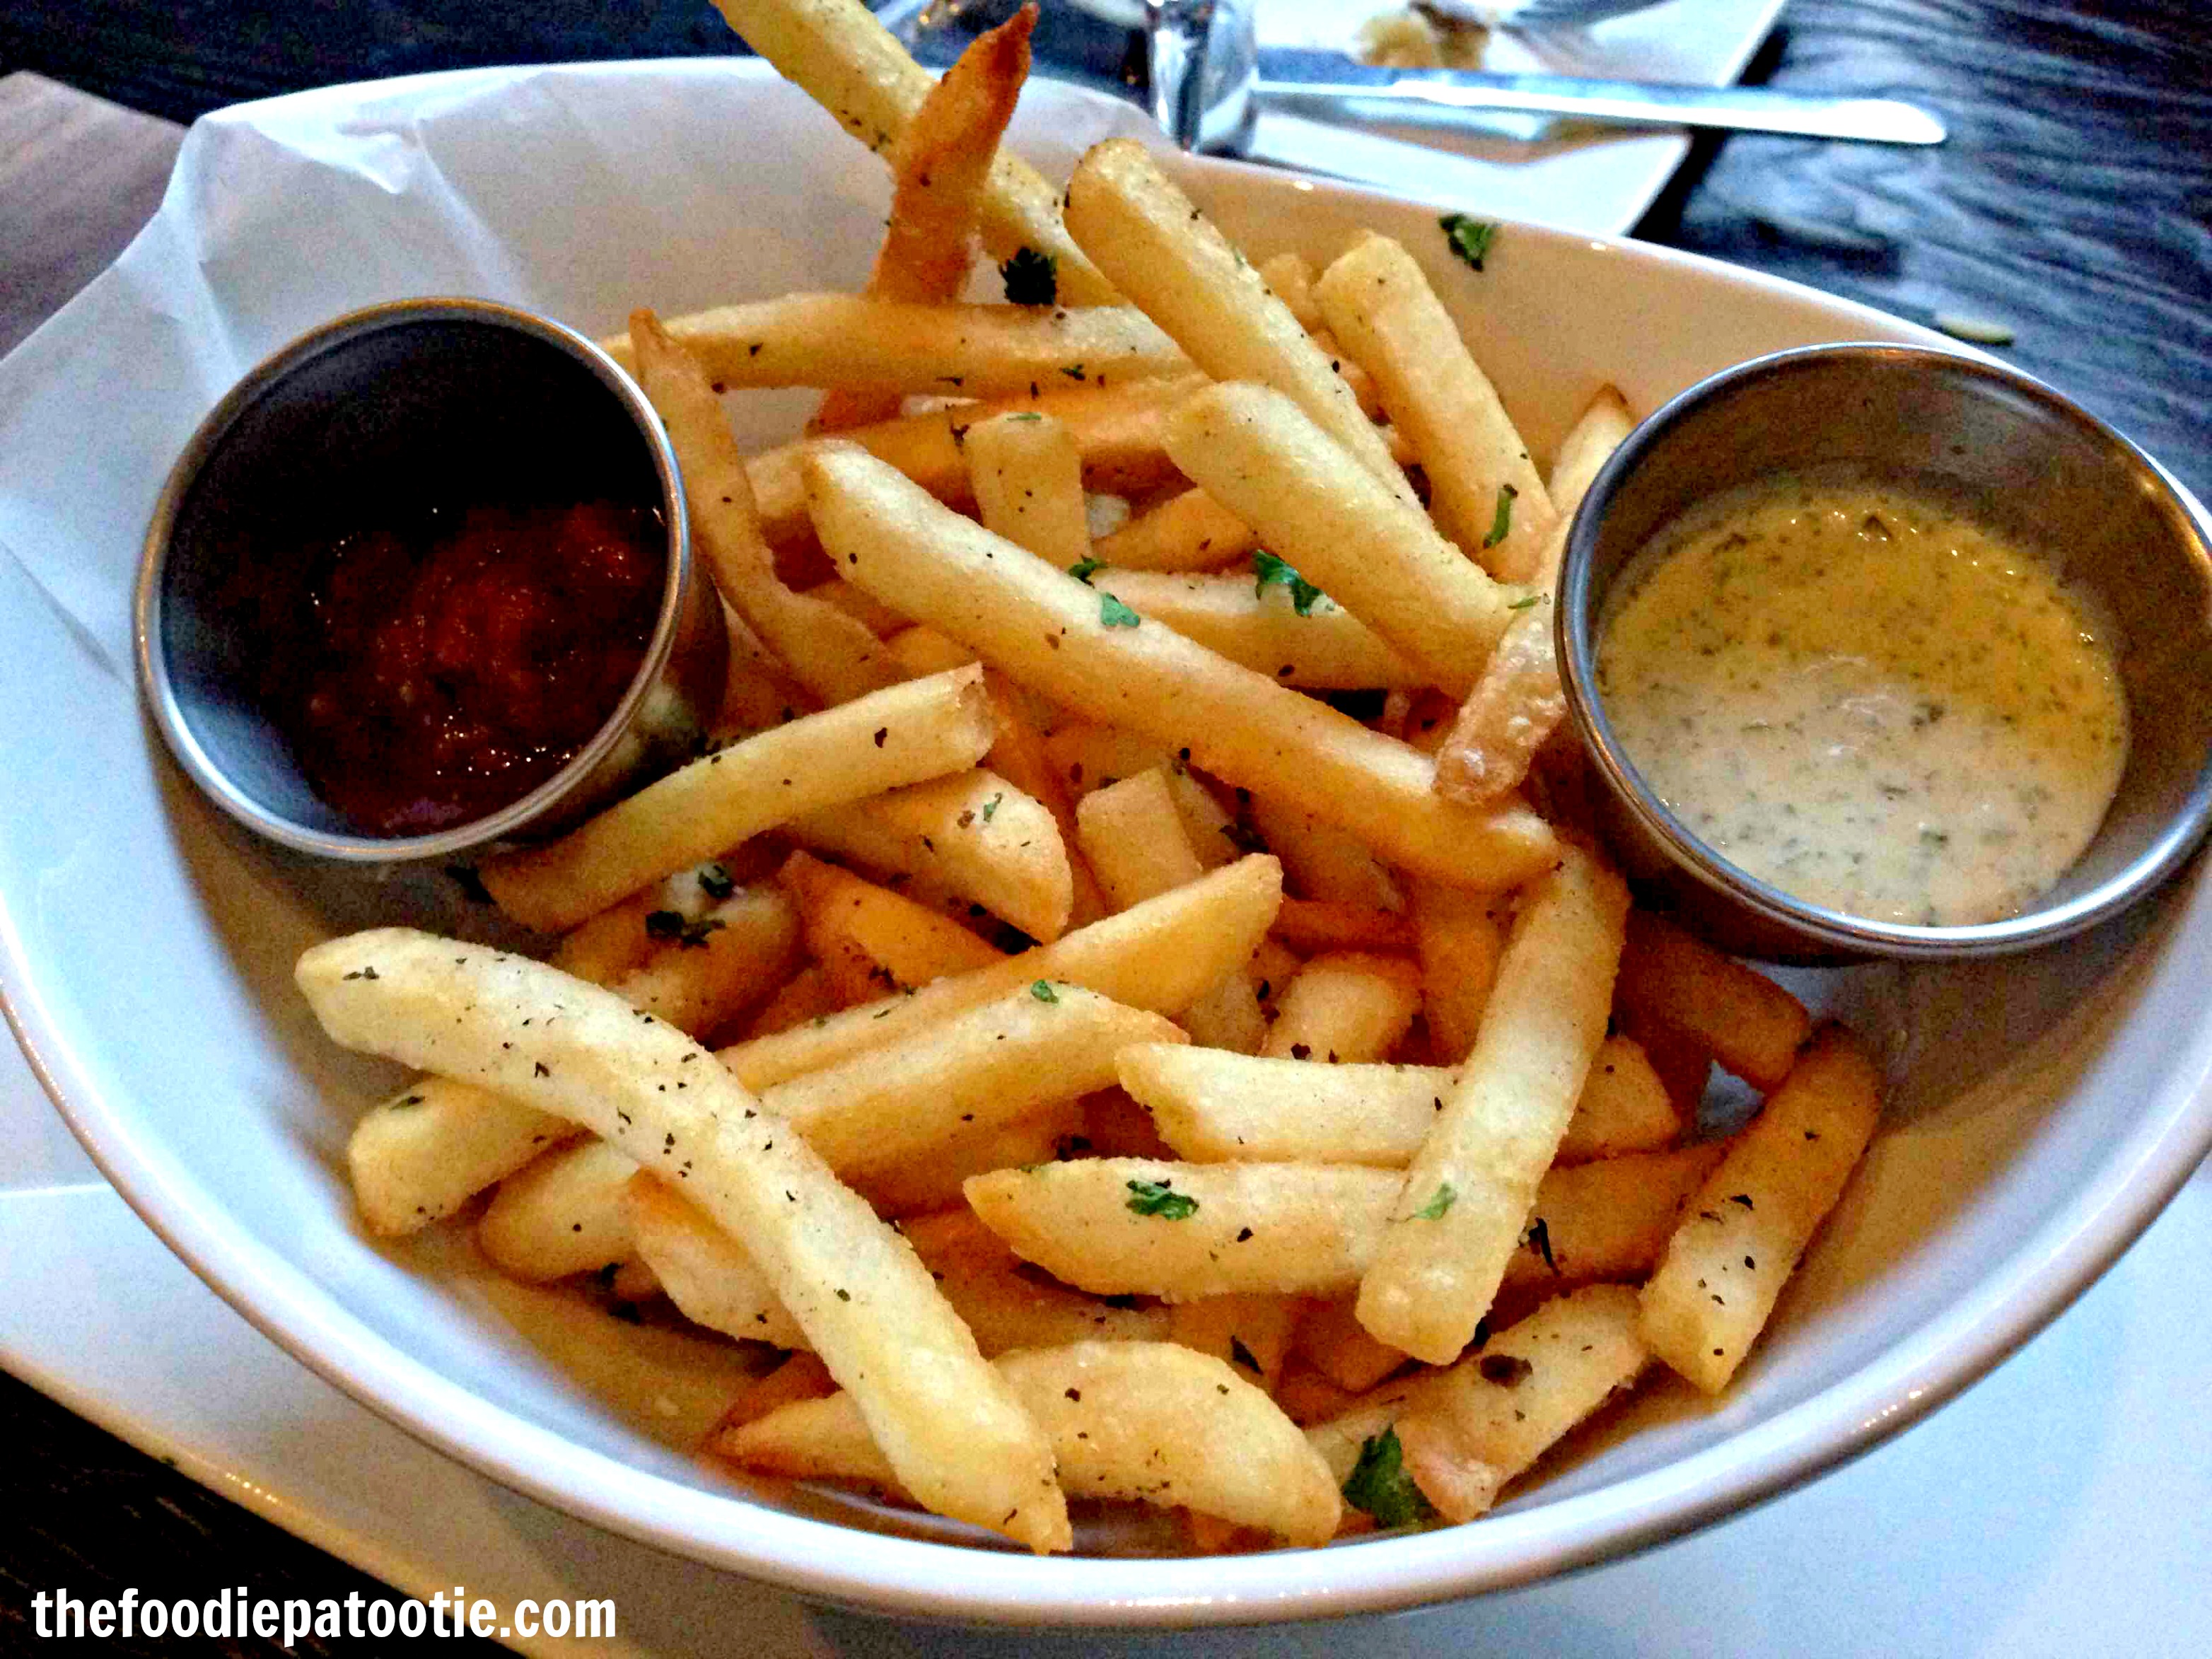 truffled-pommes-fritas - The Foodie Patootie